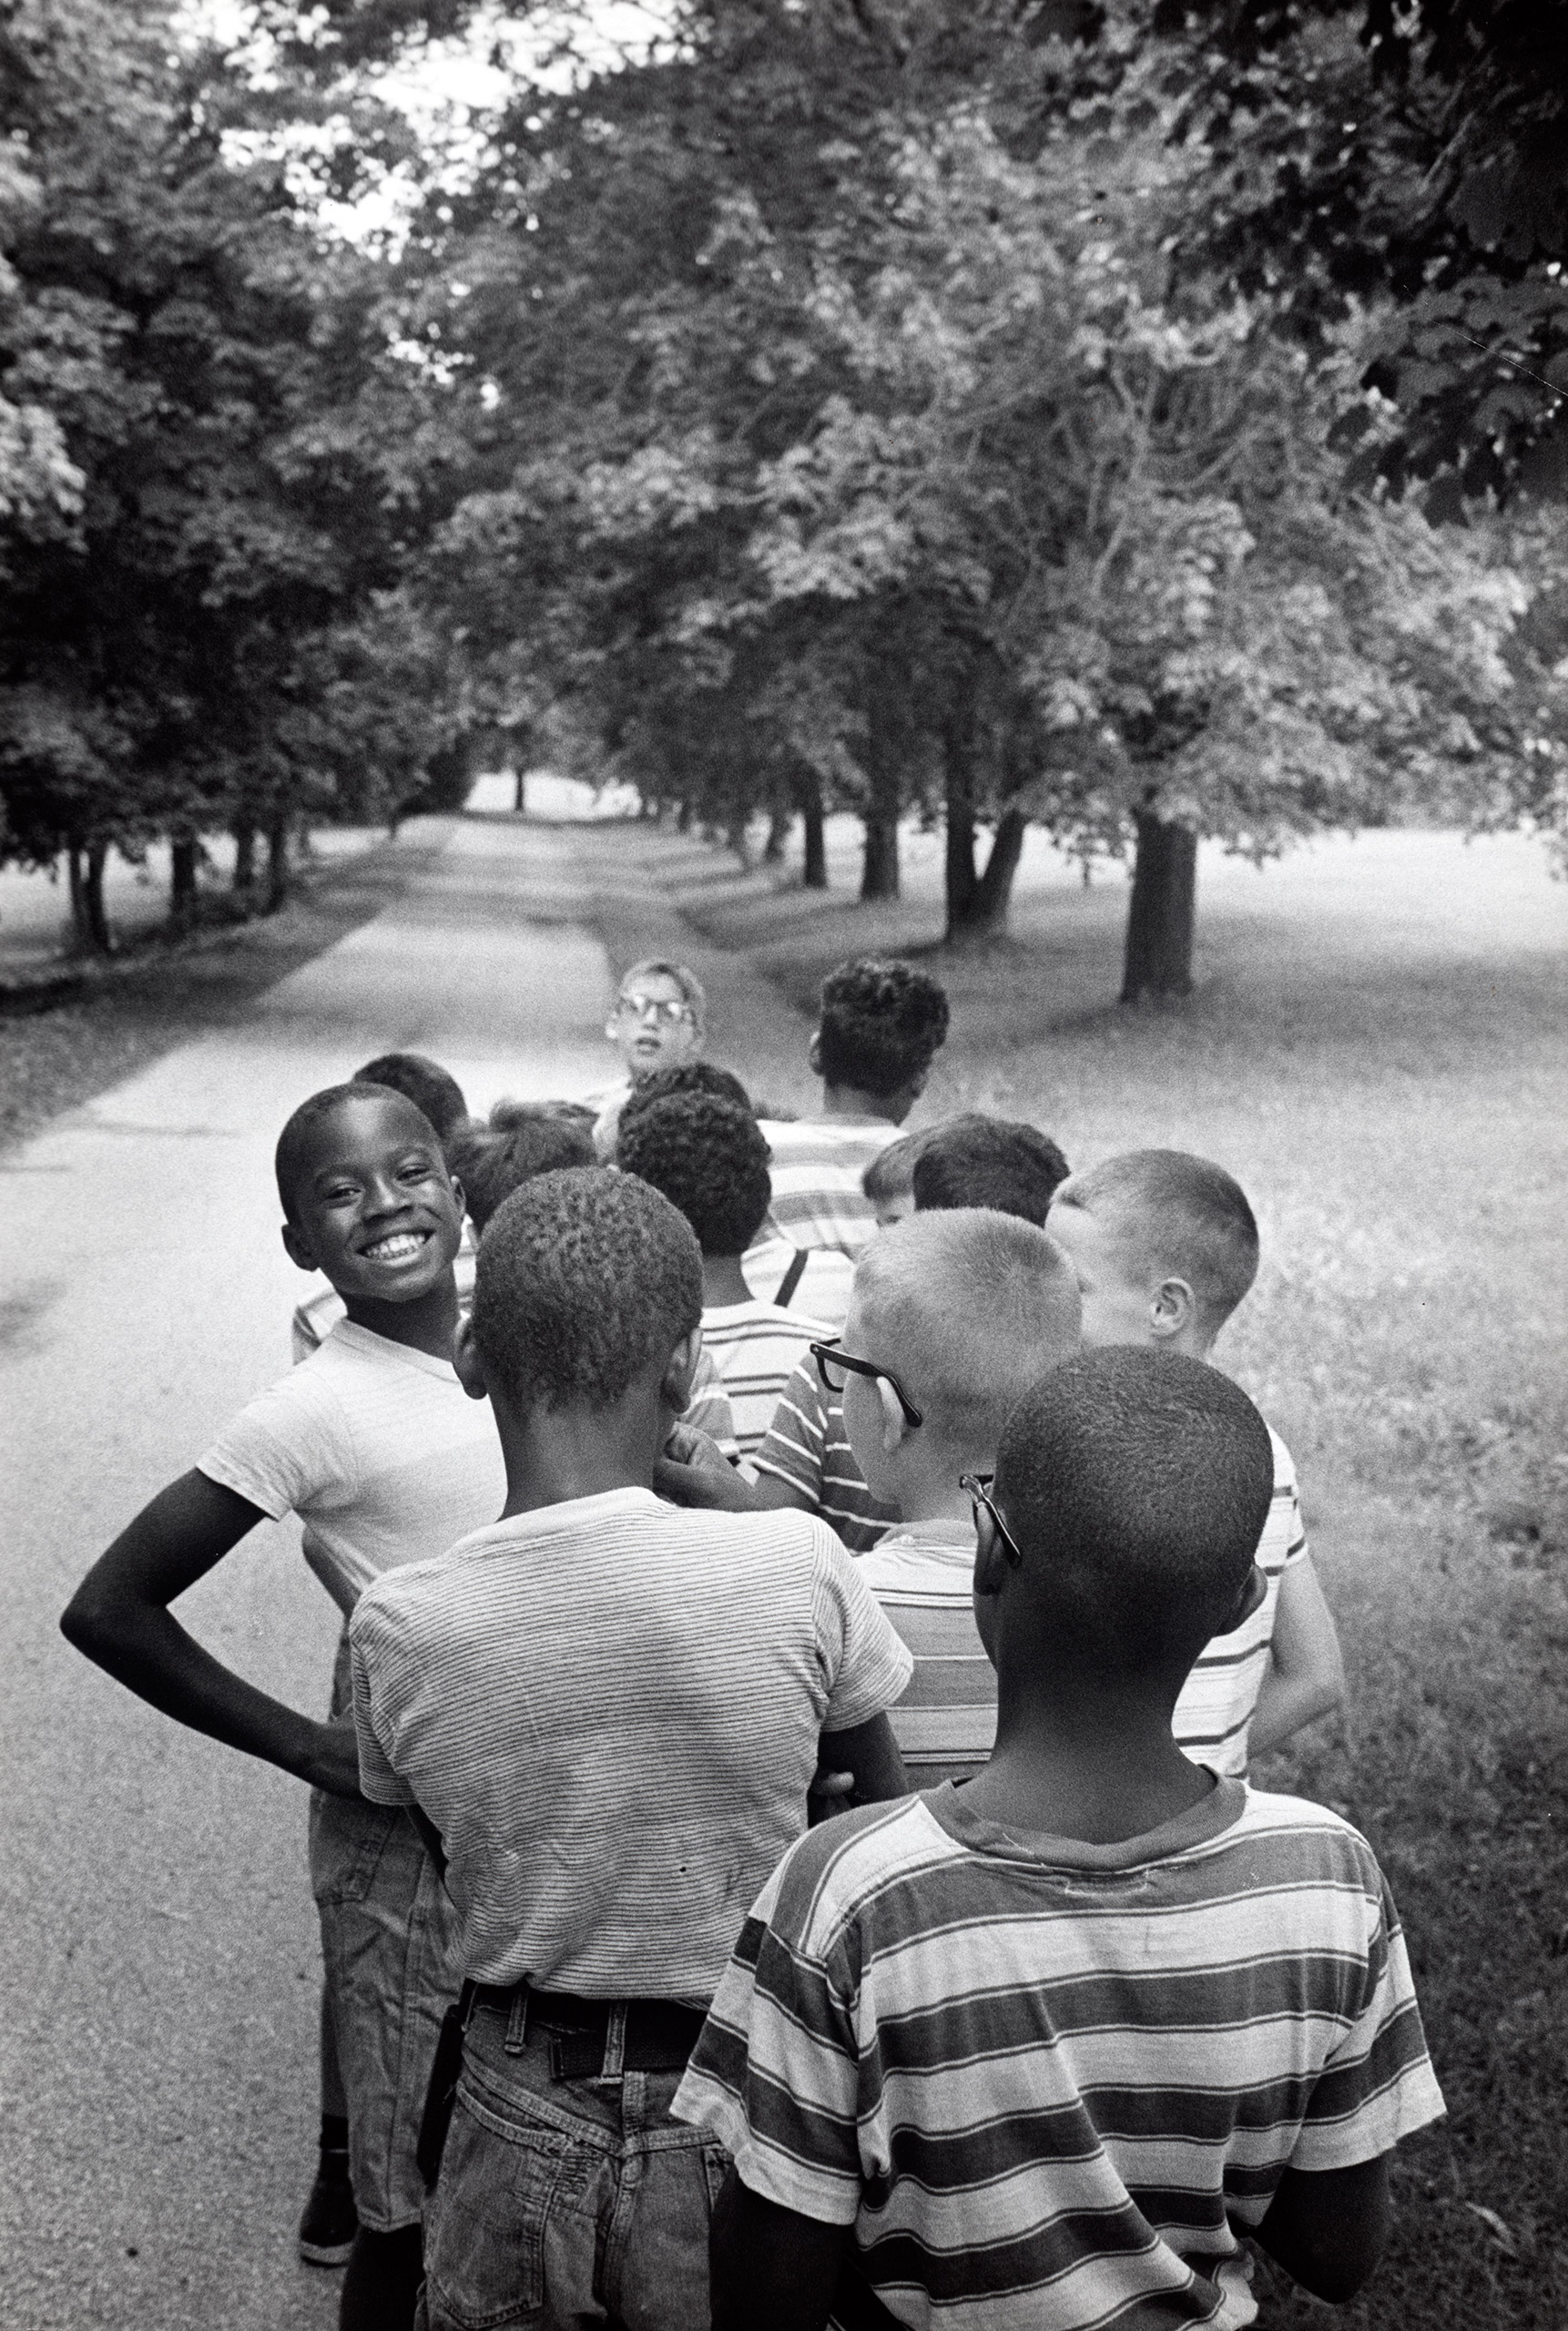 Group of twelve children shown clustered on a tree-lined paved surface. Upstate New York, 1963.